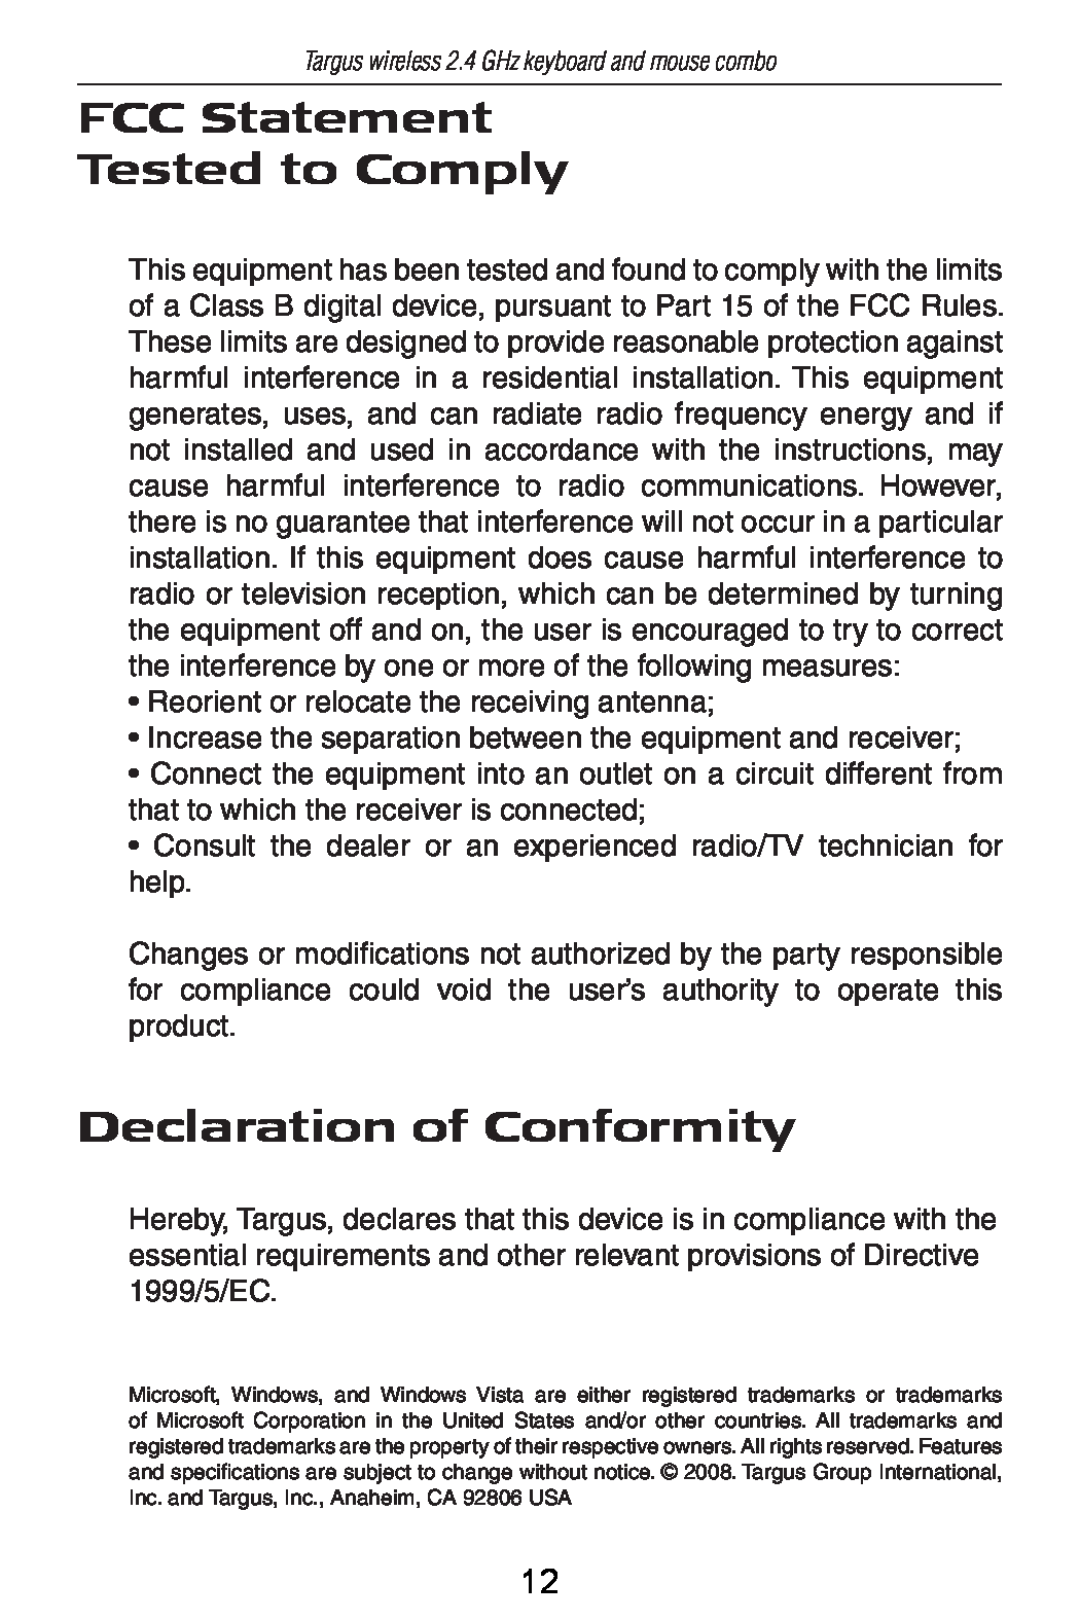 Targus AKM11 FCC Statement Tested to Comply, Declaration of Conformity, Reorient or relocate the receiving antenna 